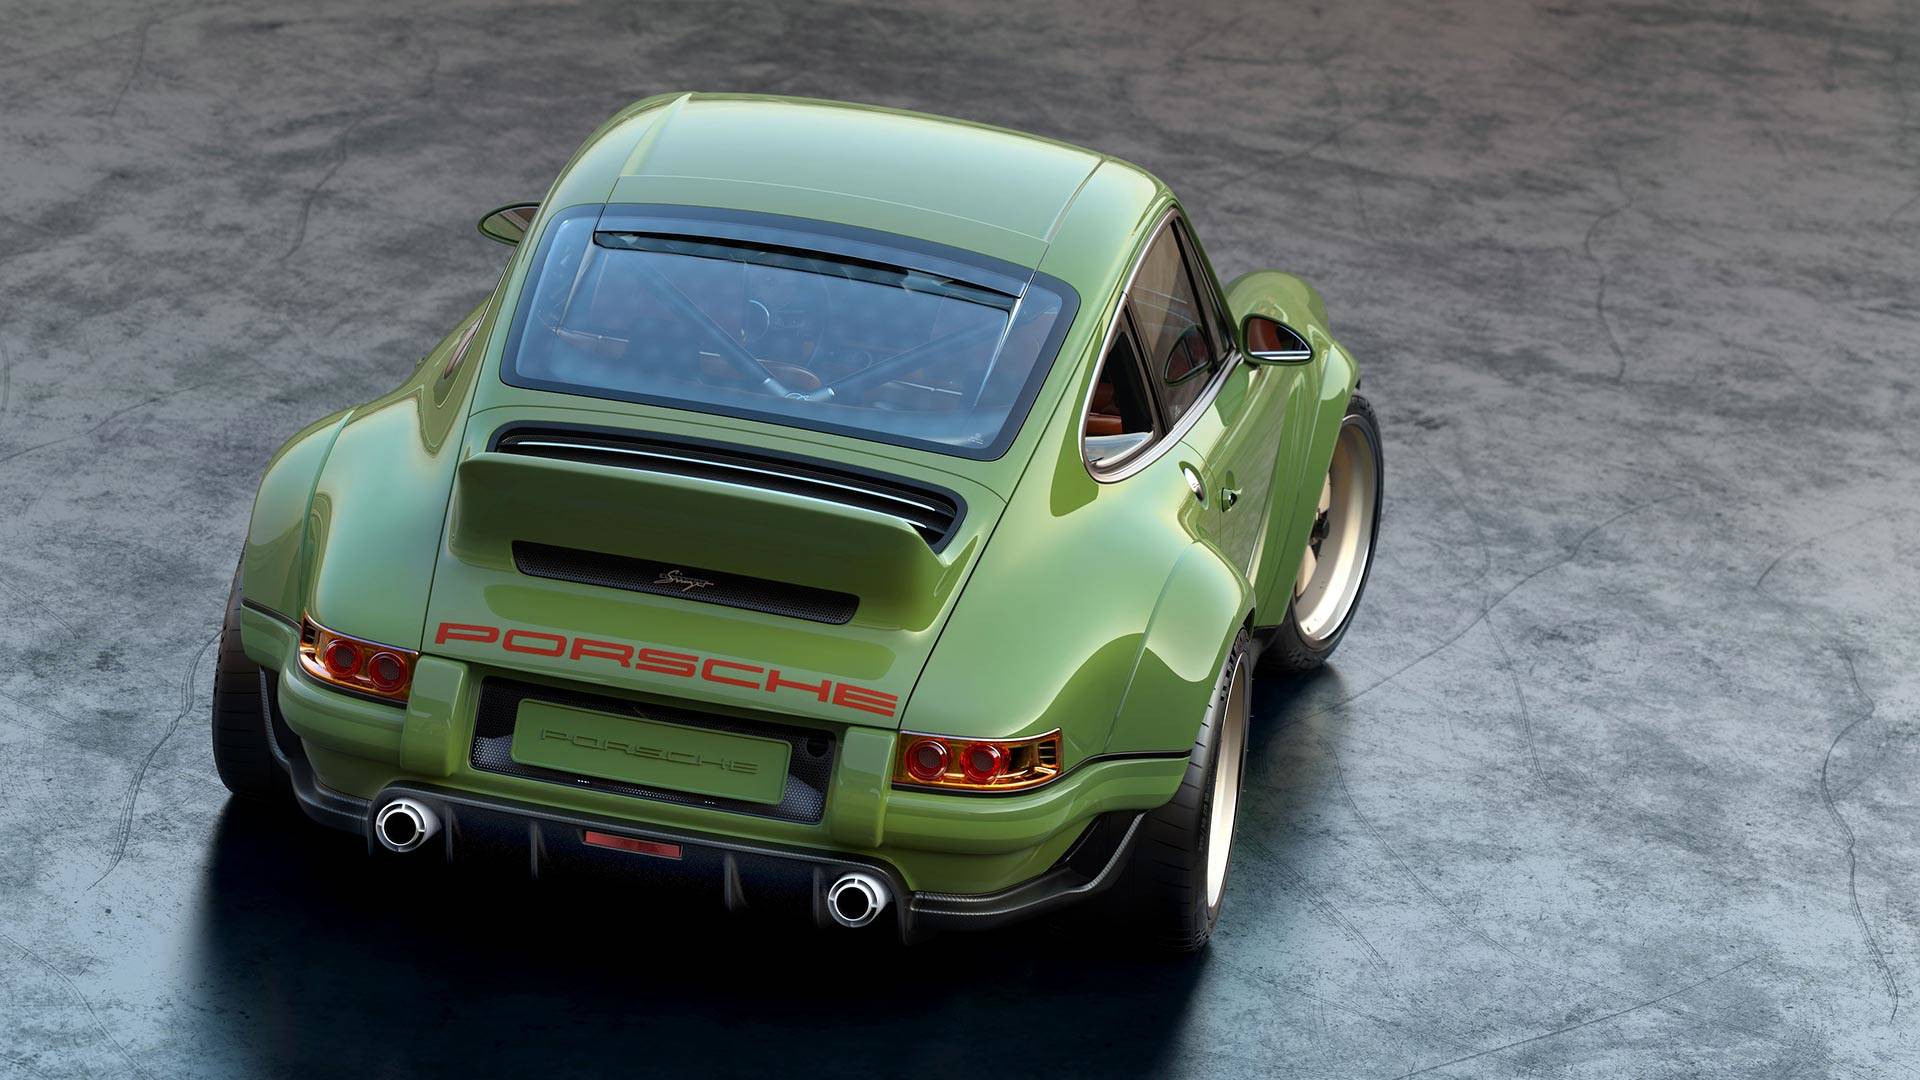 singer-s-new-500-hp-absinthe-porsche-911-is-the-ultimate-air-cooled-restomod_8.jpg